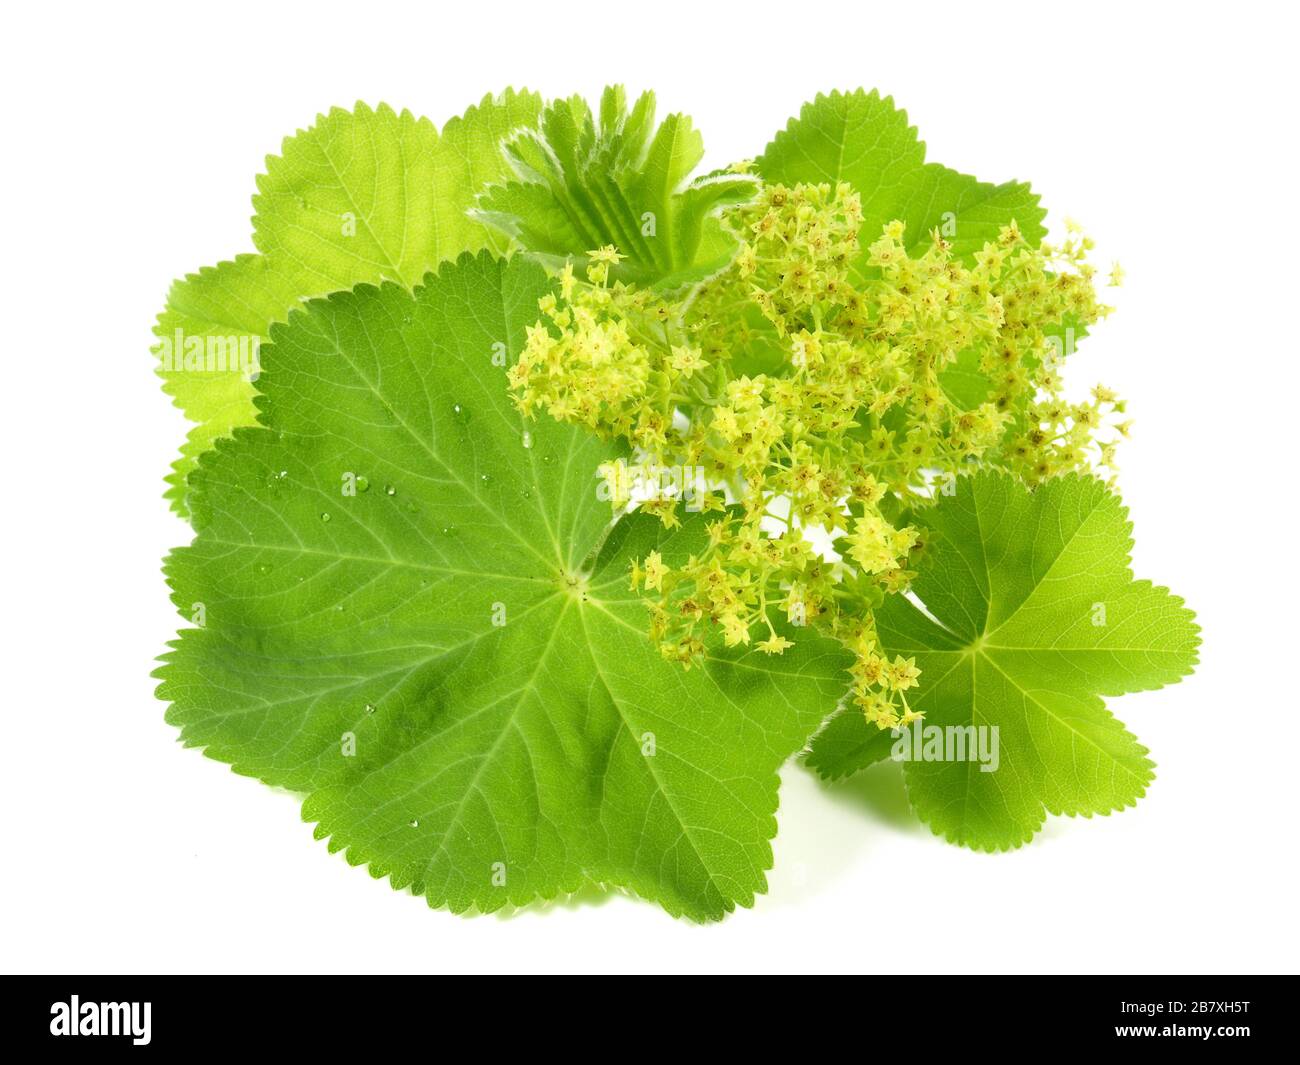 Ladys Mantle Leaves and Blossom on white Background Stock Photo